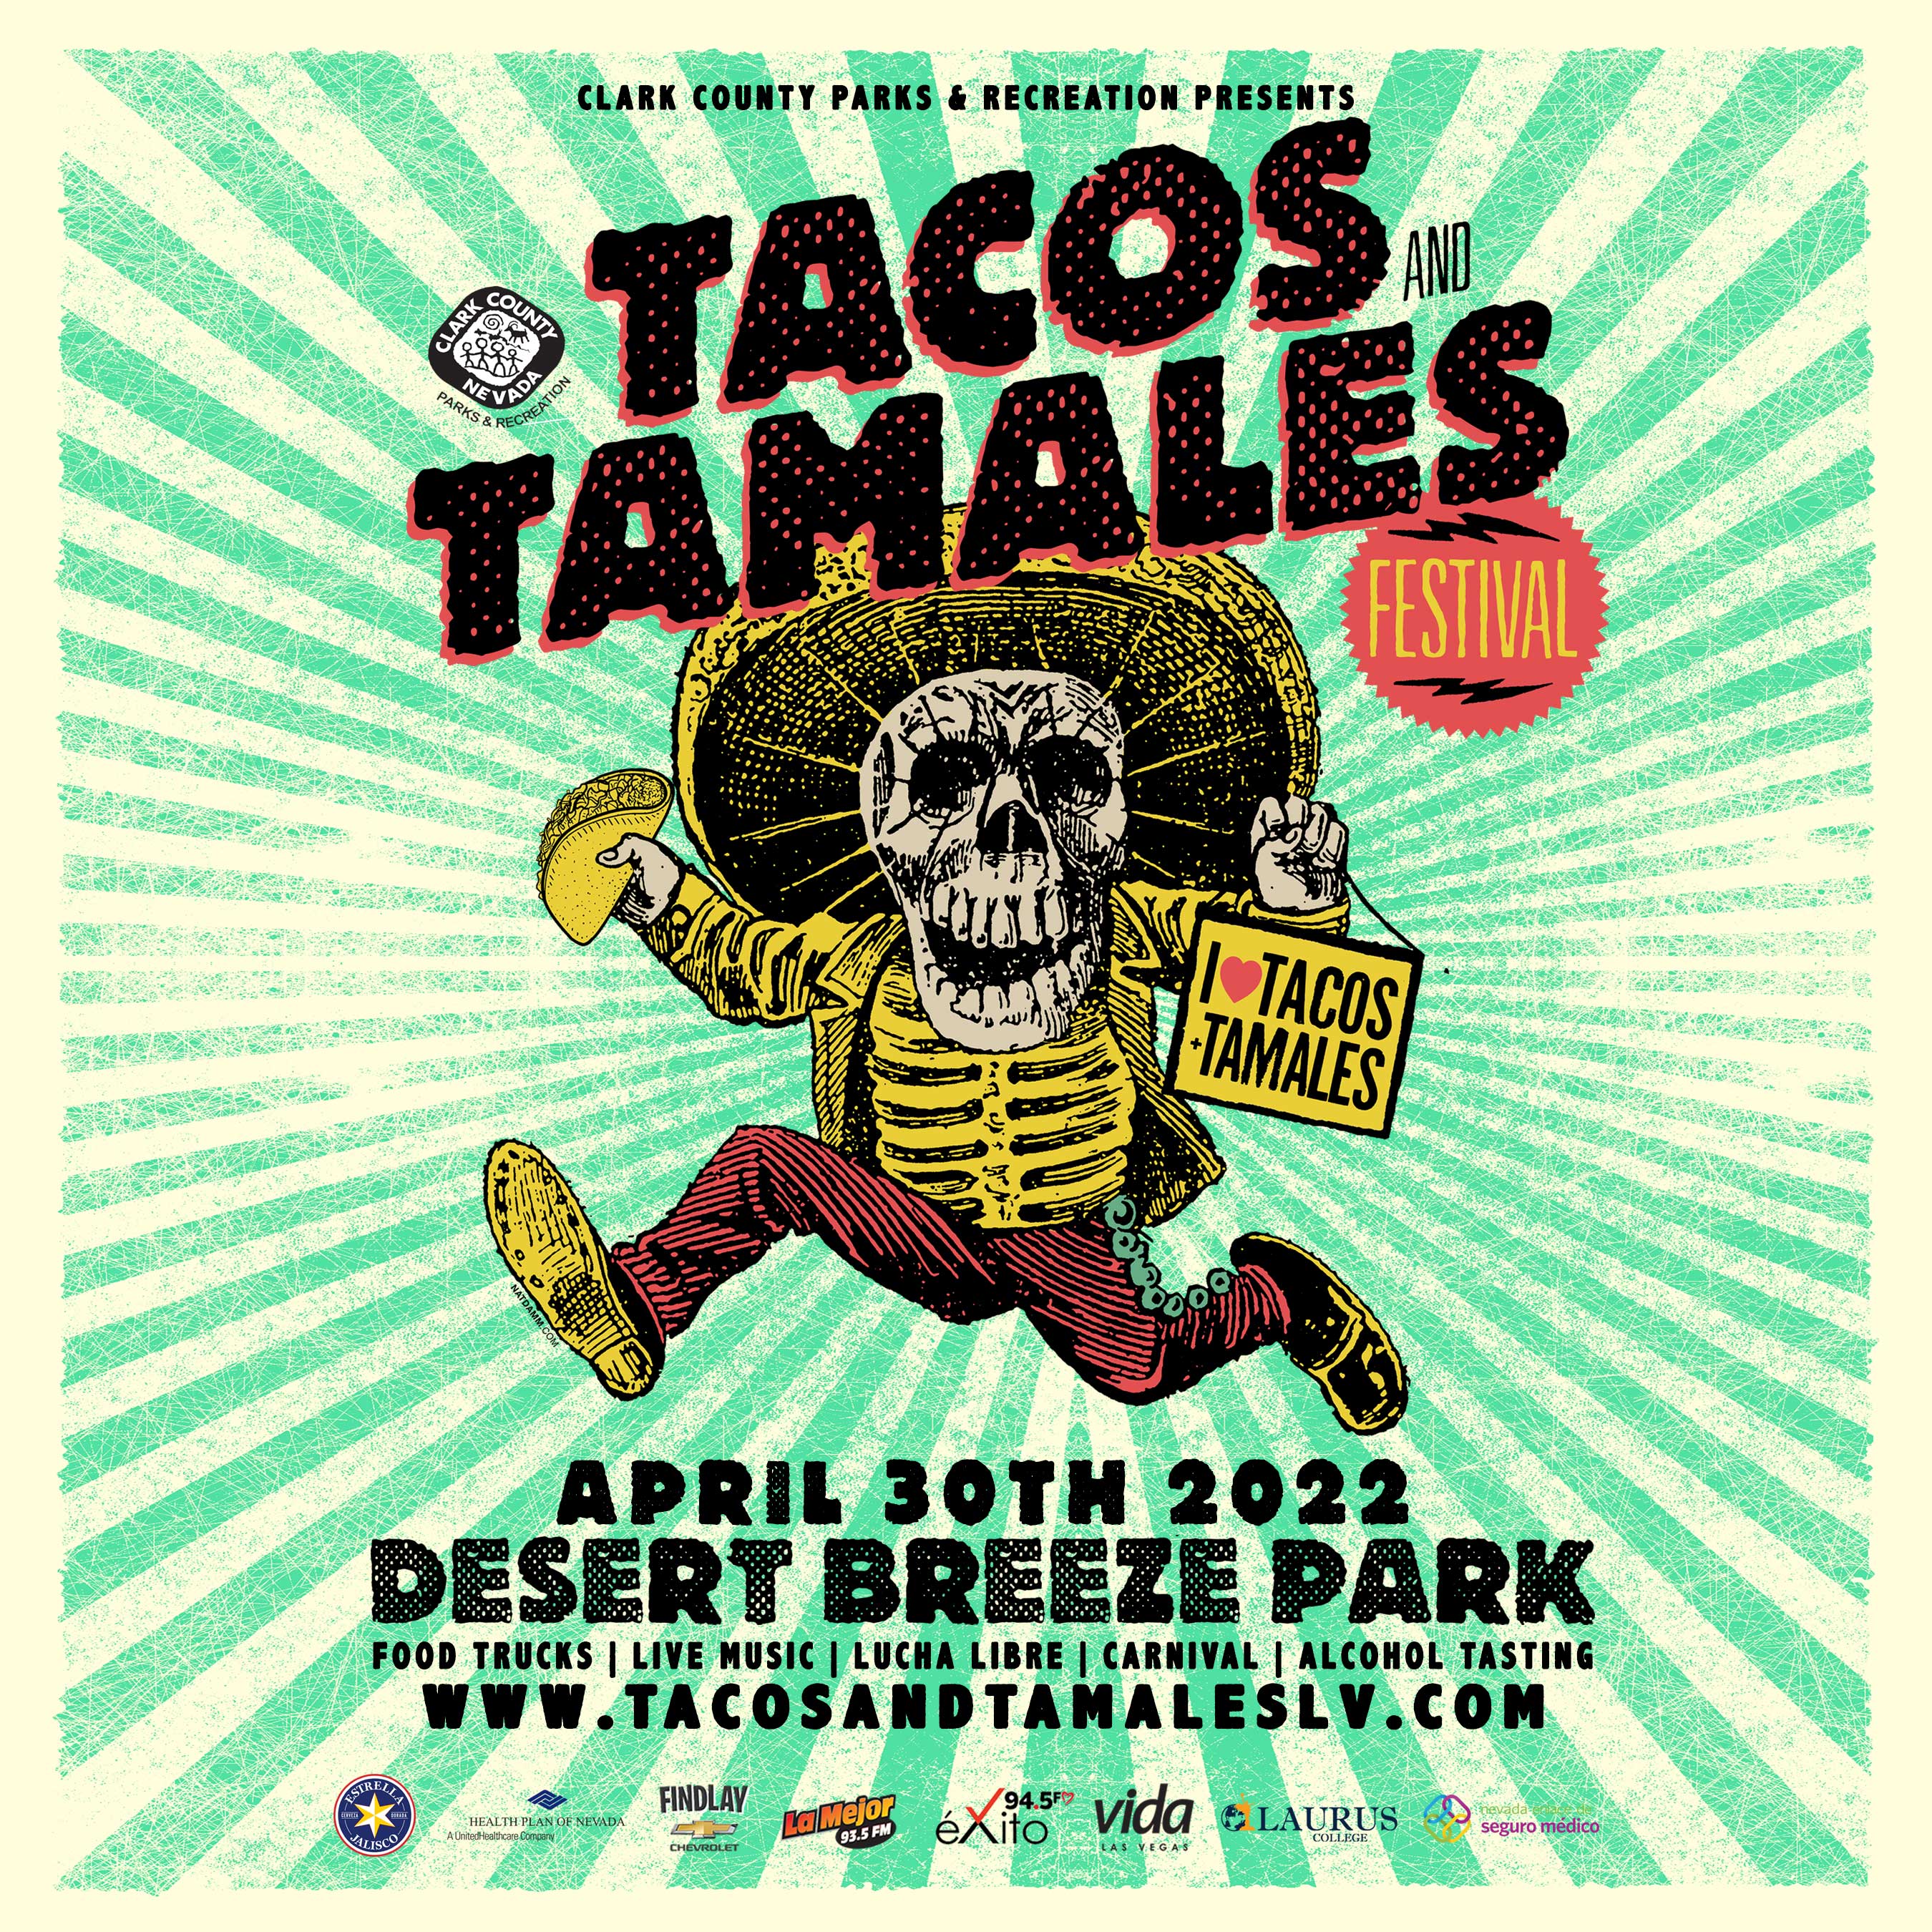 Buy Tickets to Tacos & Tamales Festival in Las Vegas on Apr 30, 2022